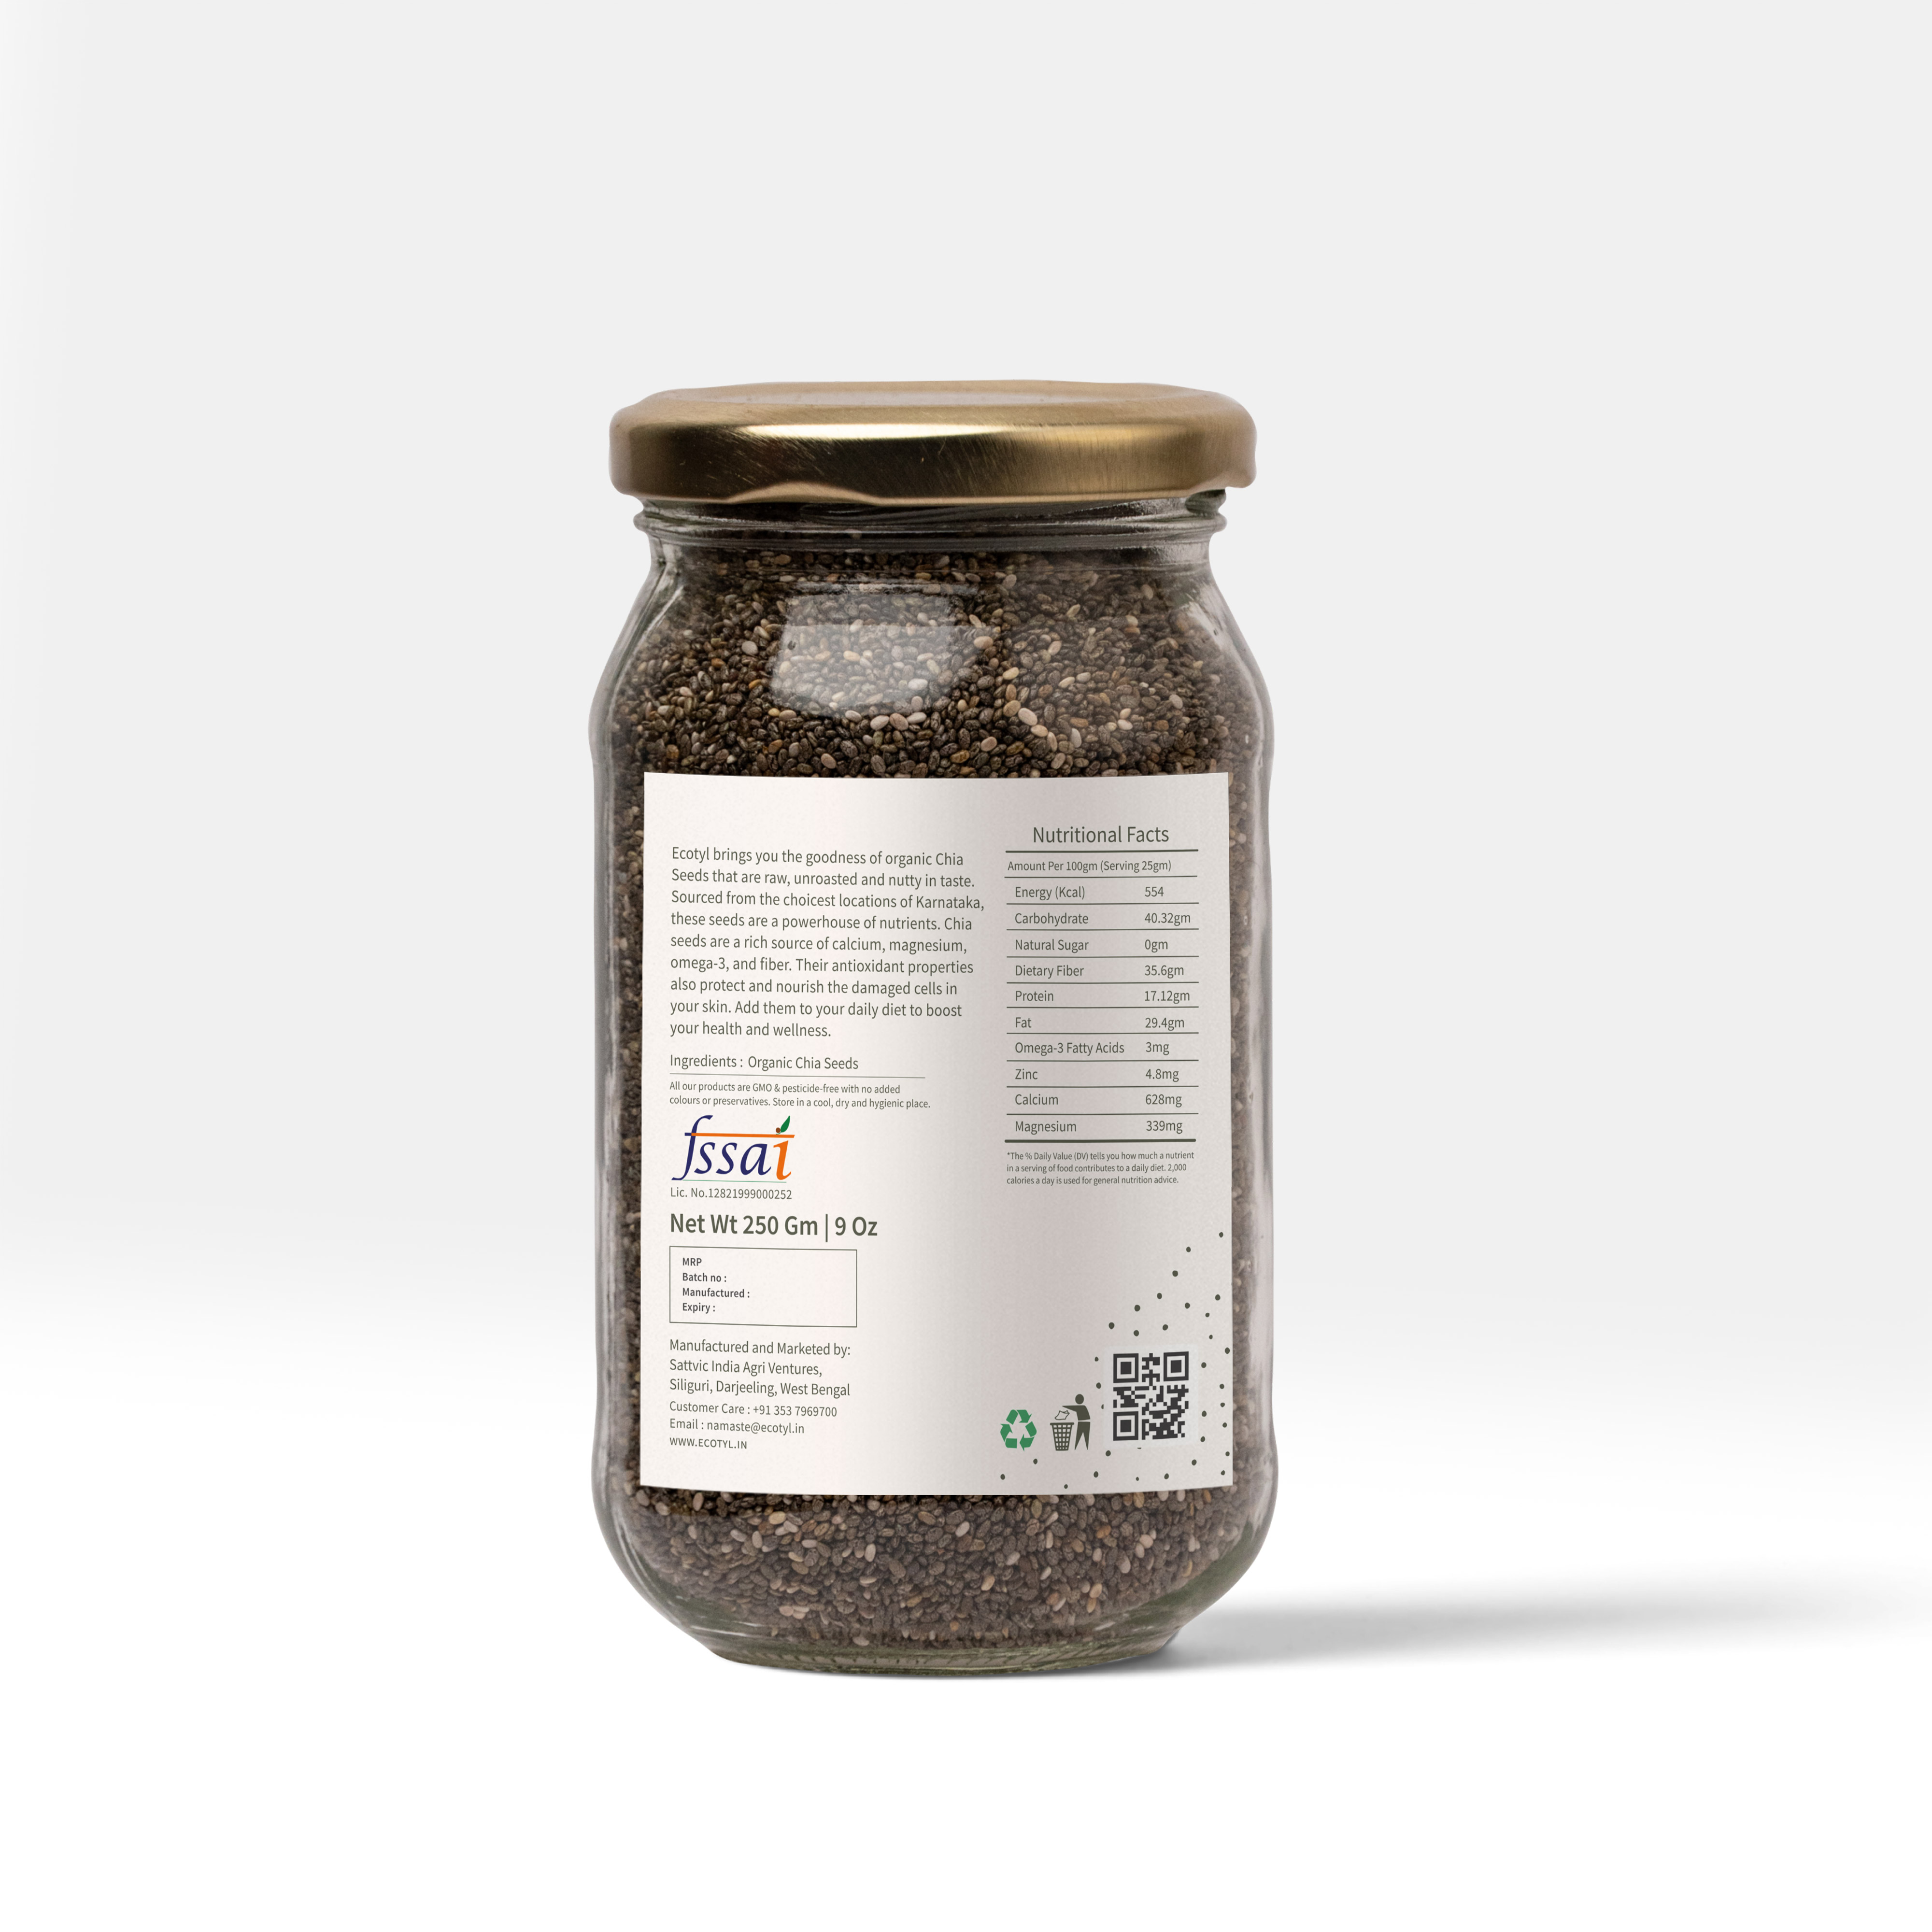 Buy Ecotyl Organic Chia Seeds - 250 g at Best Price Online